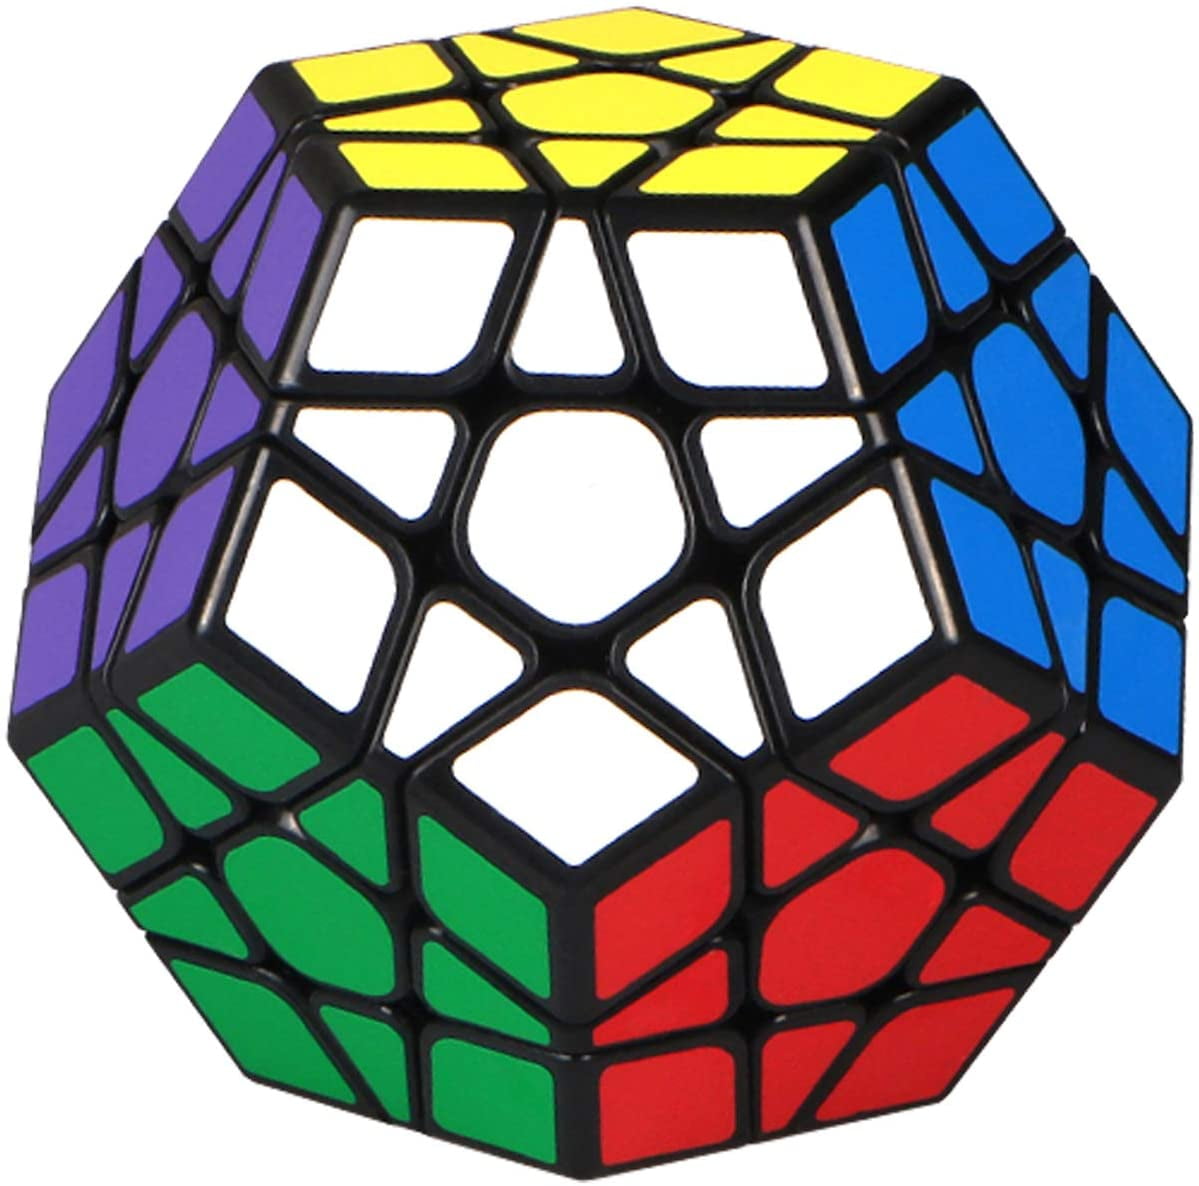 ShengShou 2x2 Megaminx Dodecahedron Magic Cube Puzzle Cube For Kids Adults White 